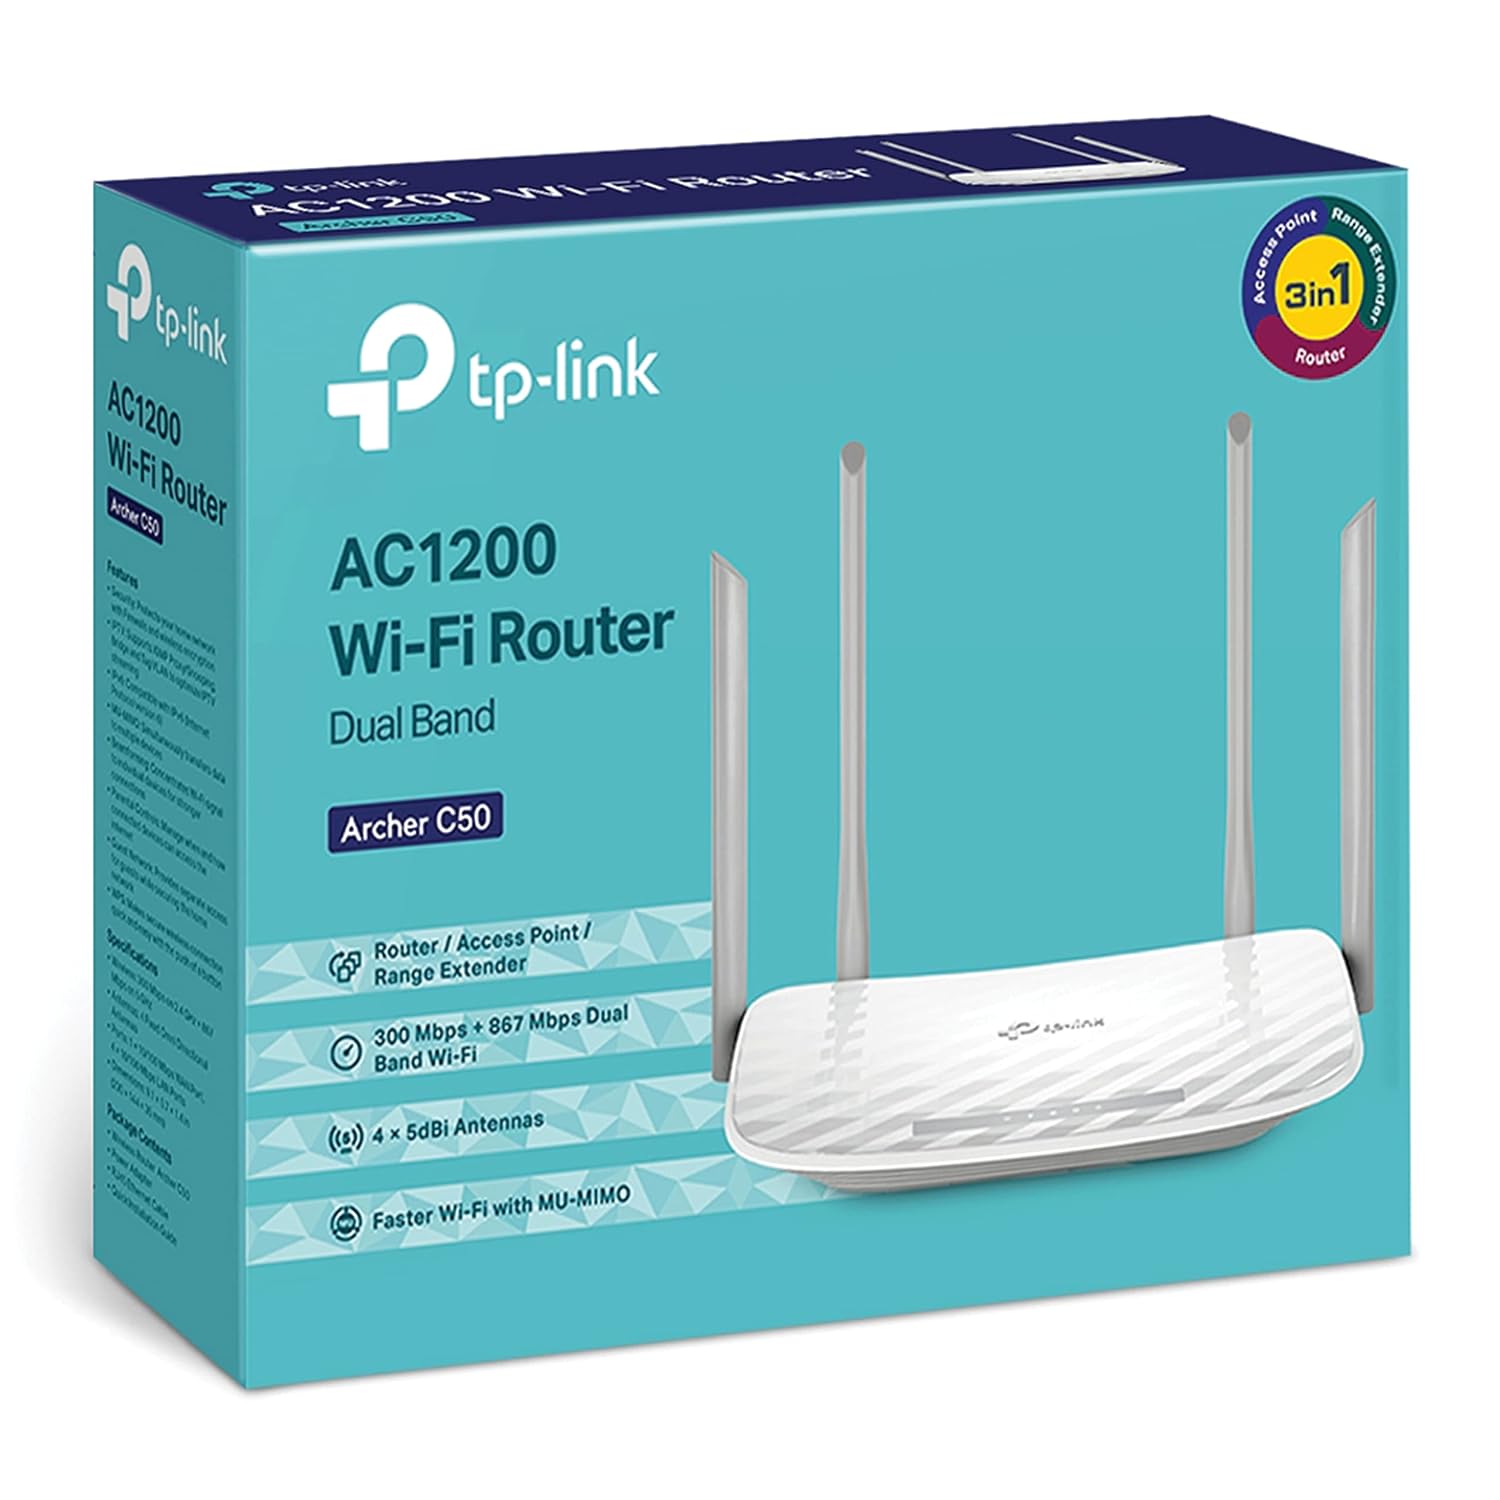 TP-LINK AC1200 Wireless Dual Band Router - White